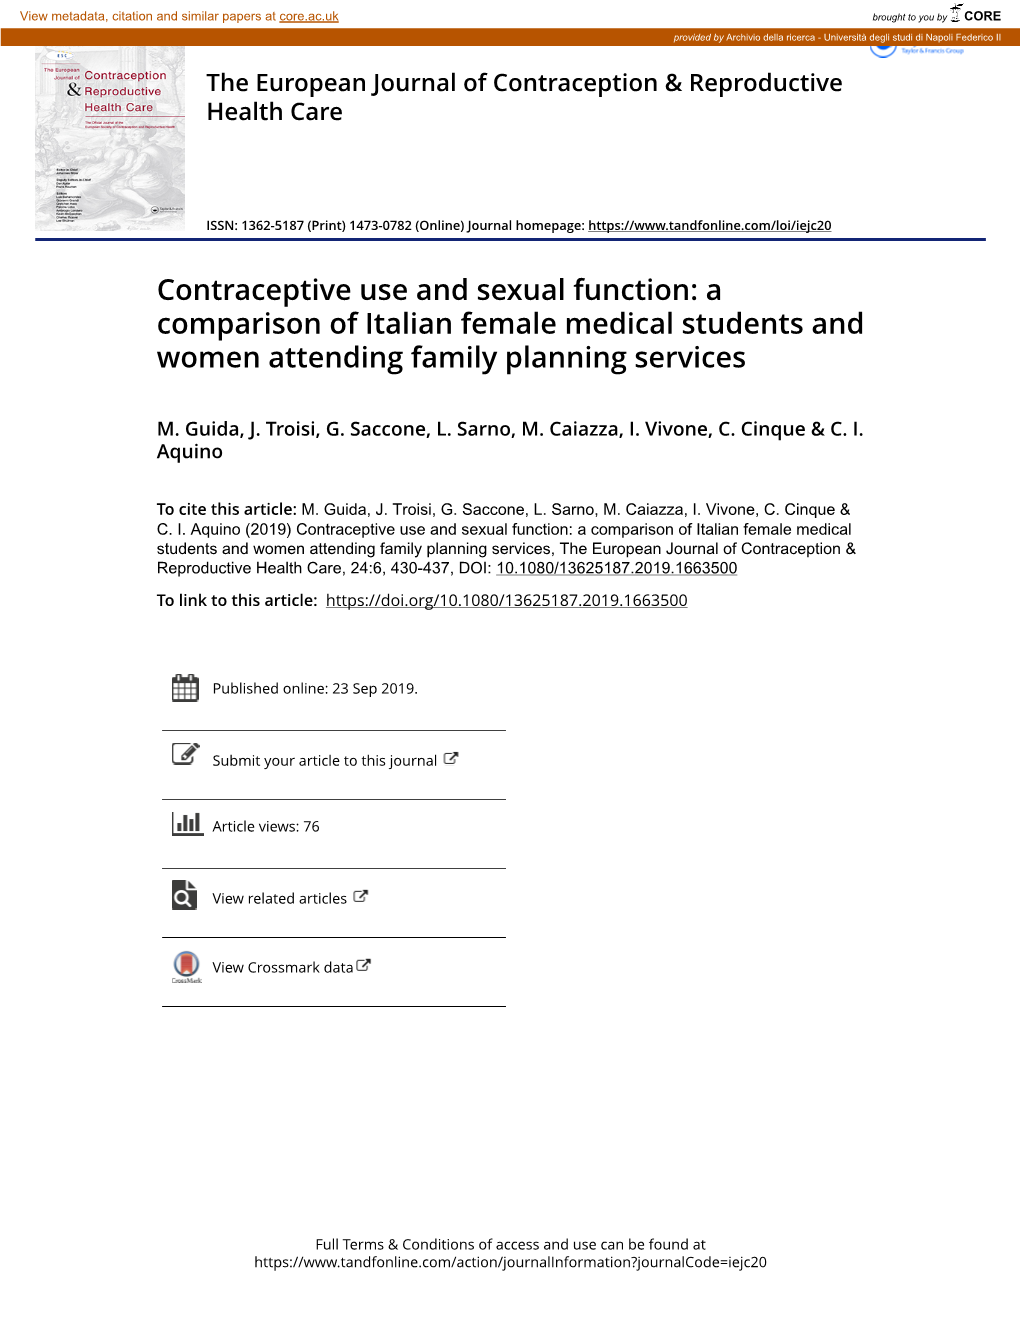 Contraceptive Use and Sexual Function: a Comparison of Italian Female Medical Students and Women Attending Family Planning Services